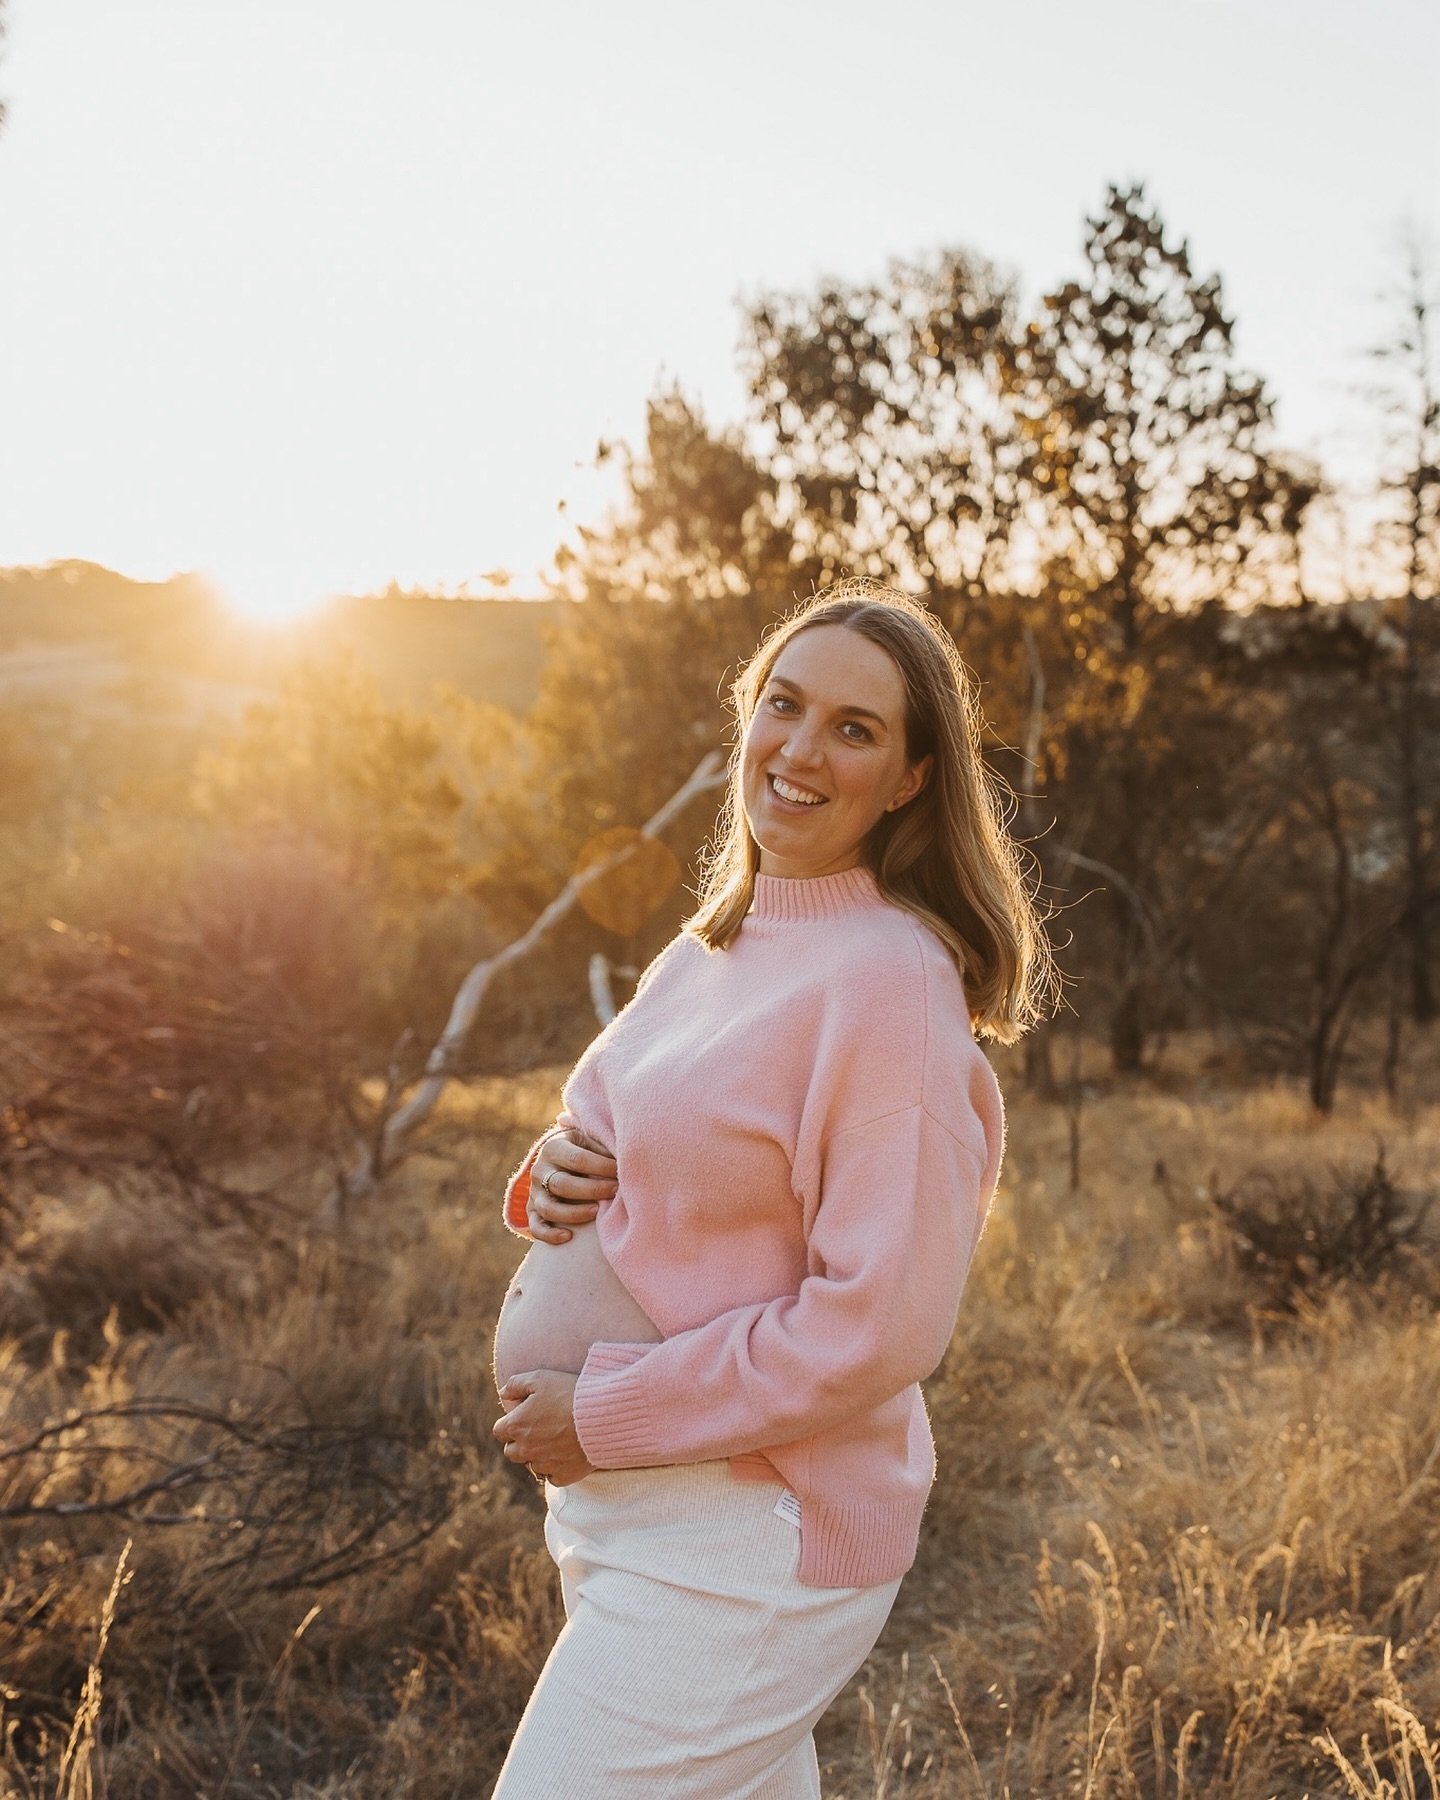 And now this gorgeous bump is gone and in its place is a beautiful baby girl Essie 🥰🥰😍😍 

#nadinnegracephotography #inhomenewbornphotography #newbornlifestylephotography #clarevalleynewbornphotographer #yorkepeninsulanewbornphotographer #clareval